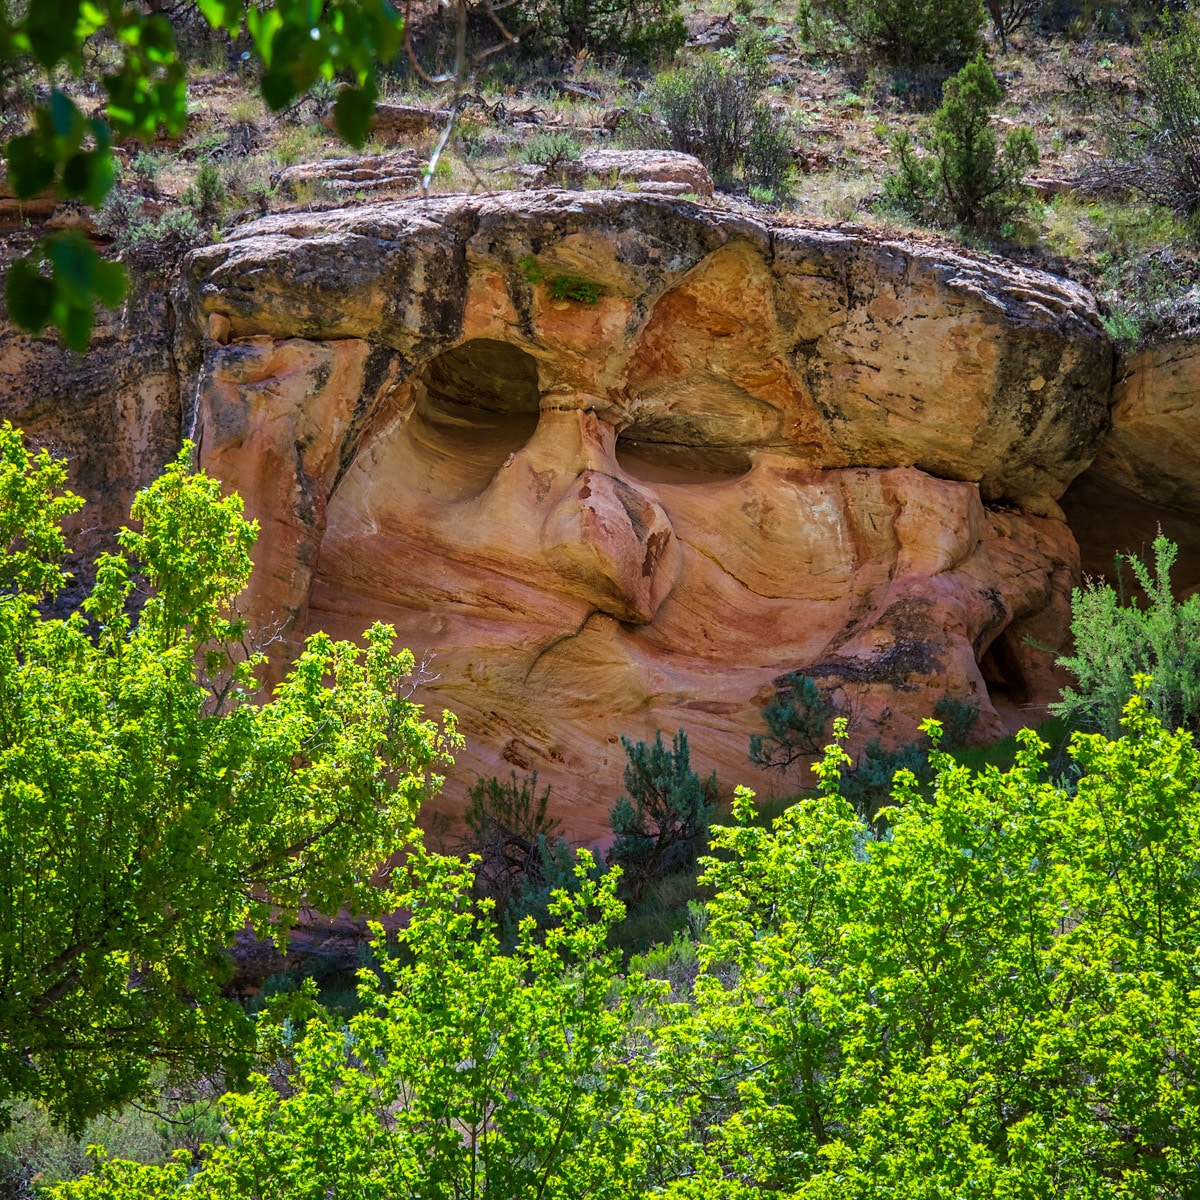 This formation is easy to miss. It is located on a sweeping curve along the creek on Echo Park Road, about half a mile before Whispering Cave.